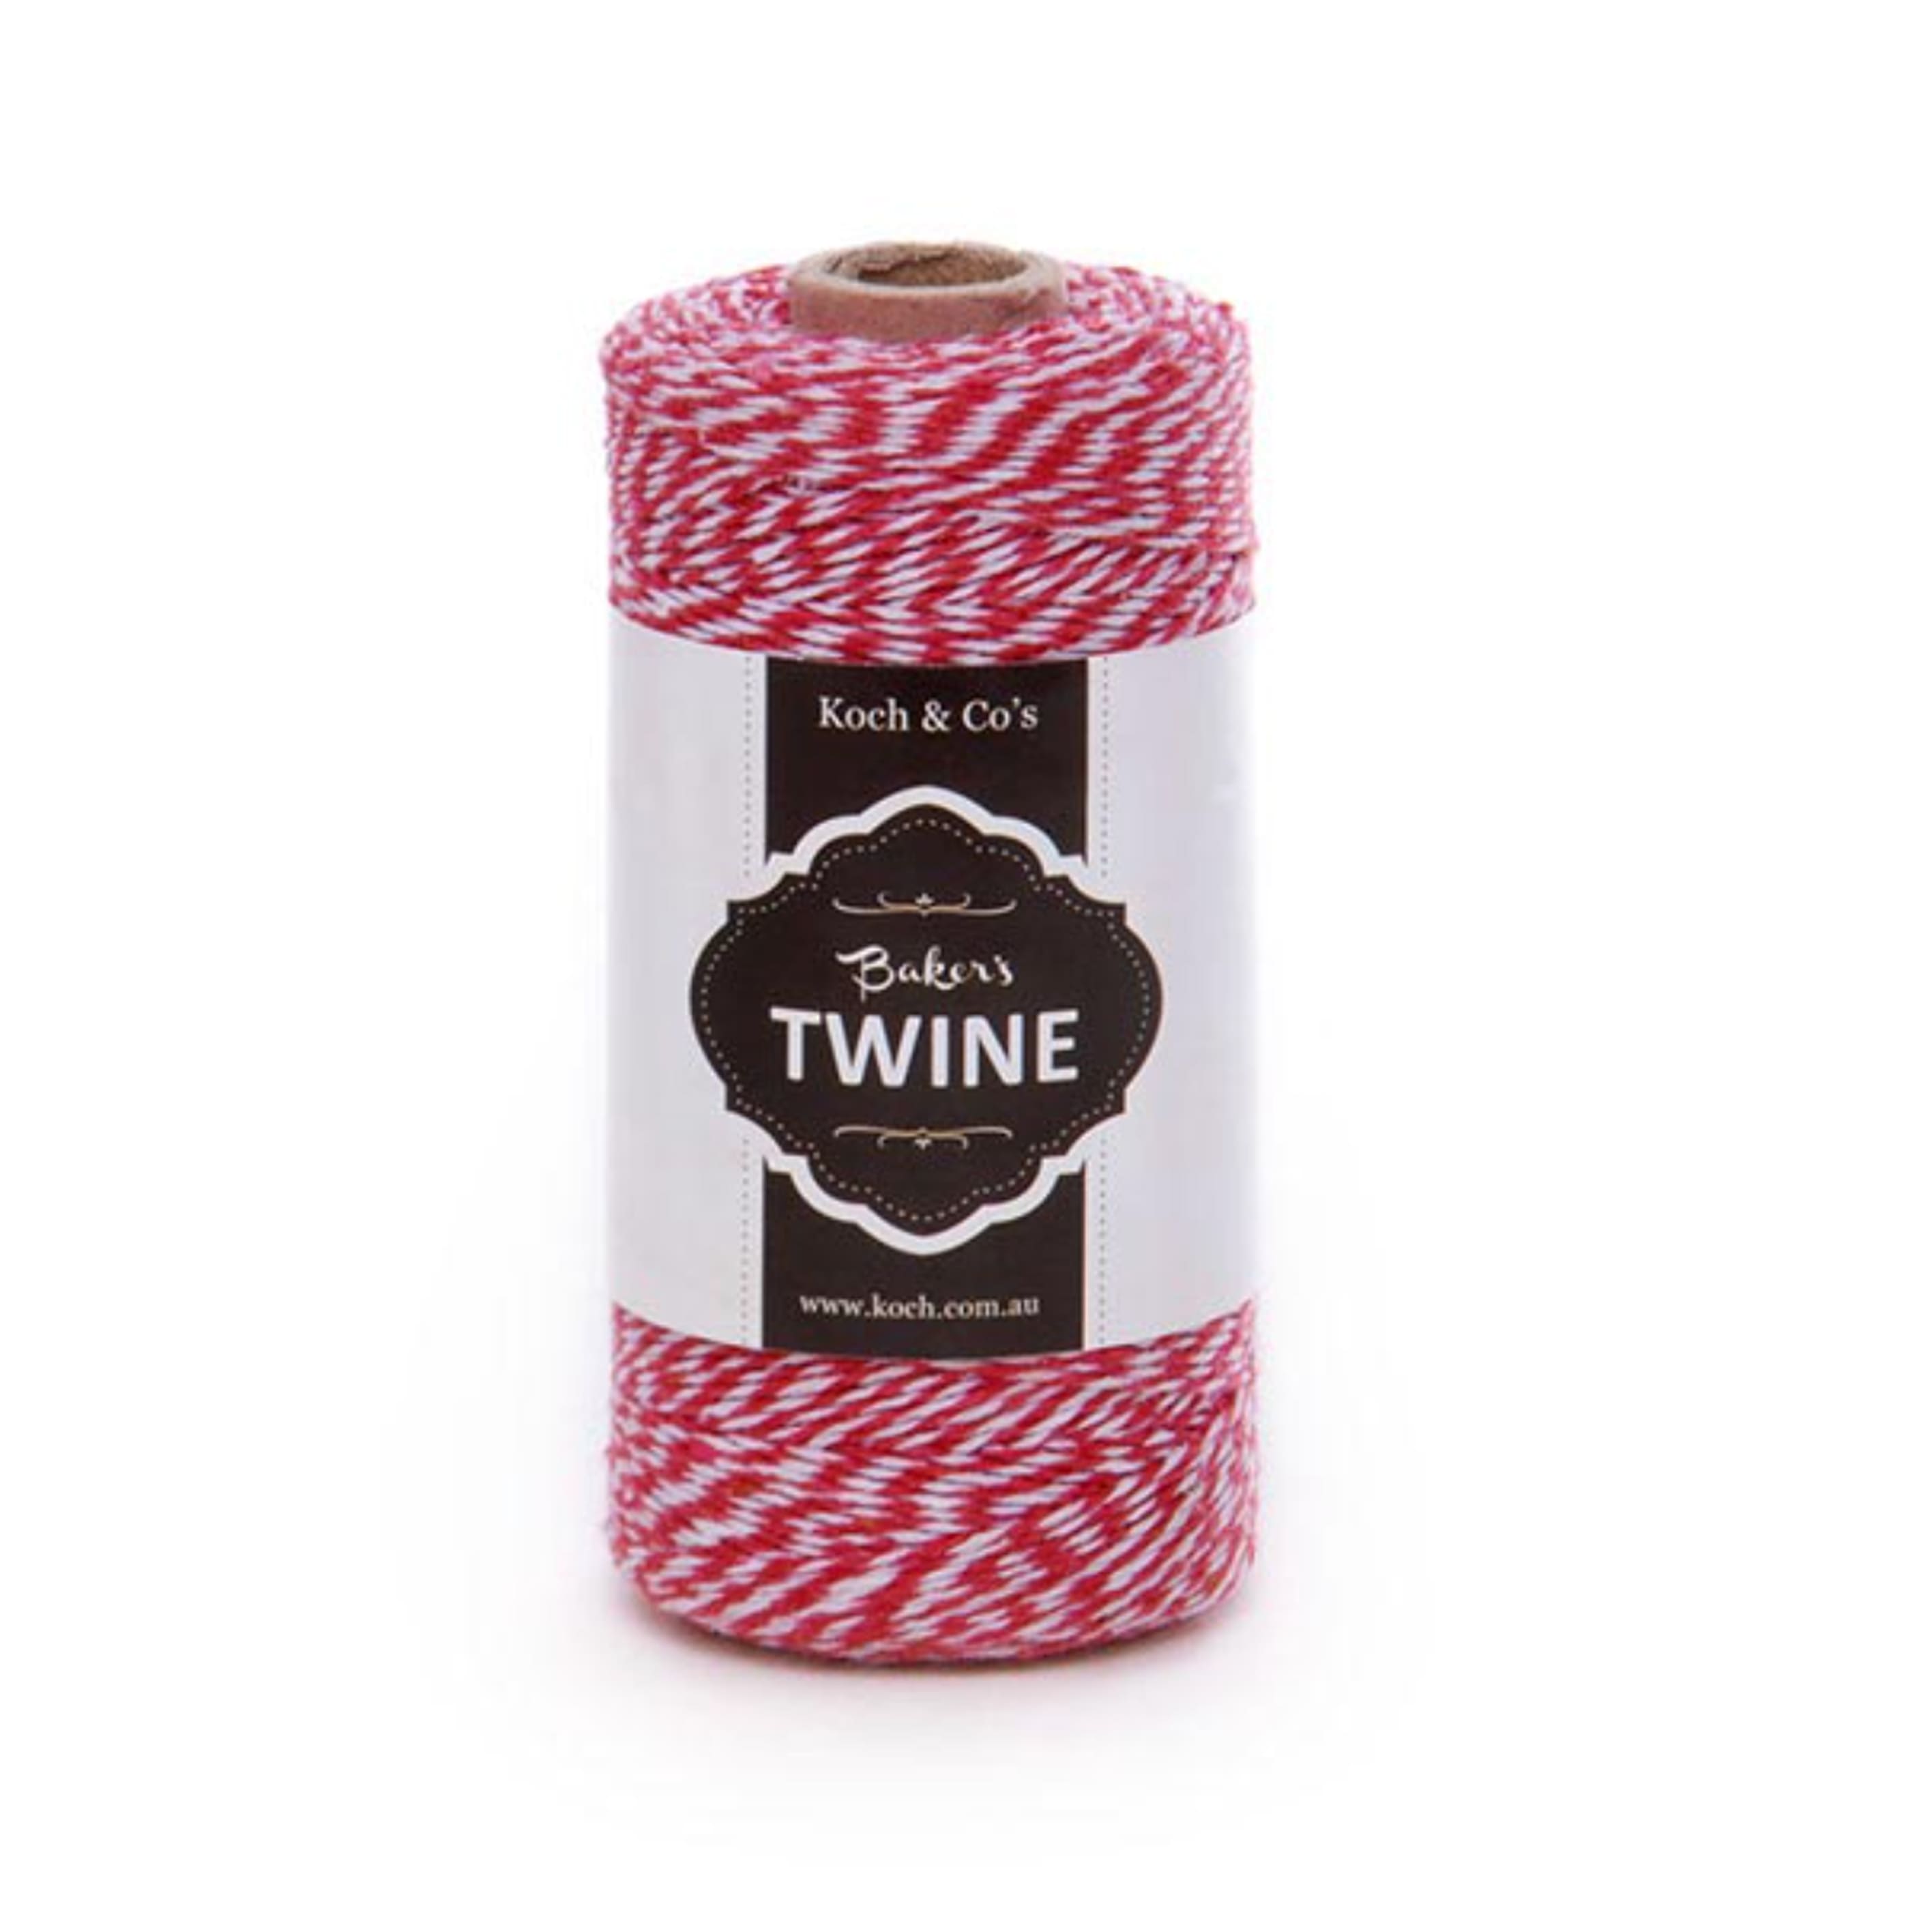 Baker's Twine | 1mm x 220 Metres |  4 COLOUR OPTIONS AVAILABLE